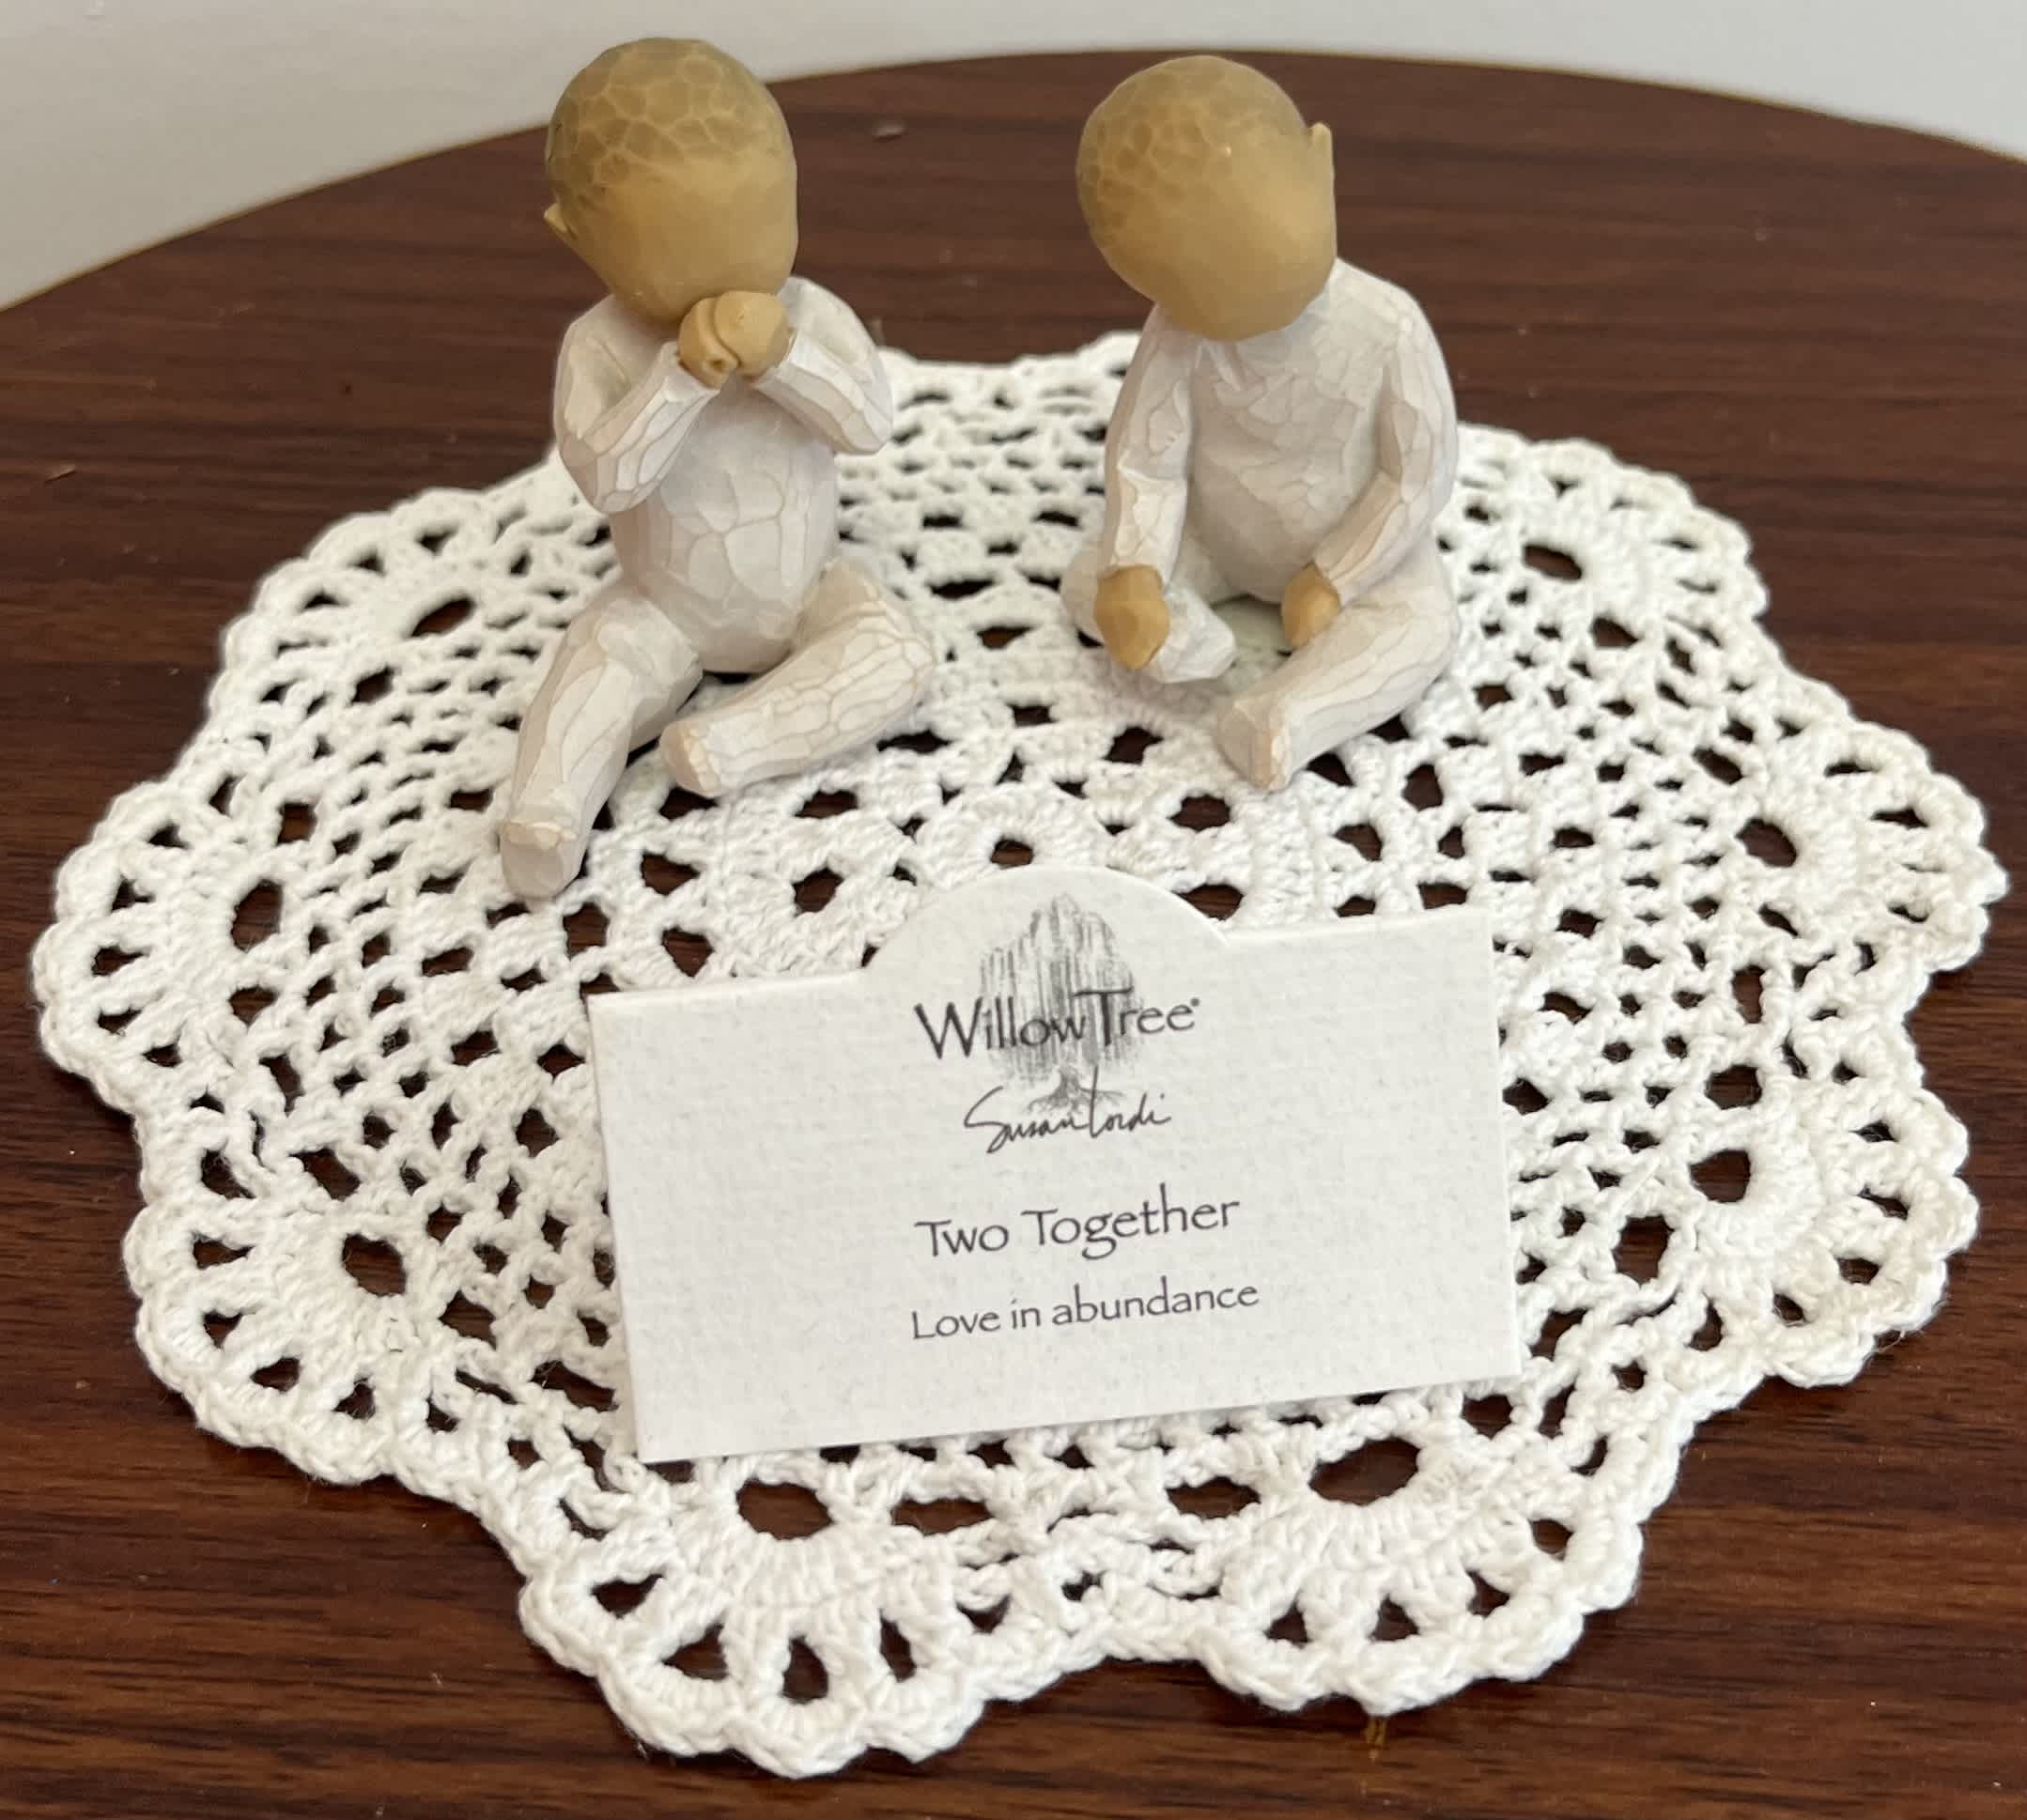 WillowTree Figurine - “Two Together” - The “Two Together” WillowTree Figurine. “Love in abundance”